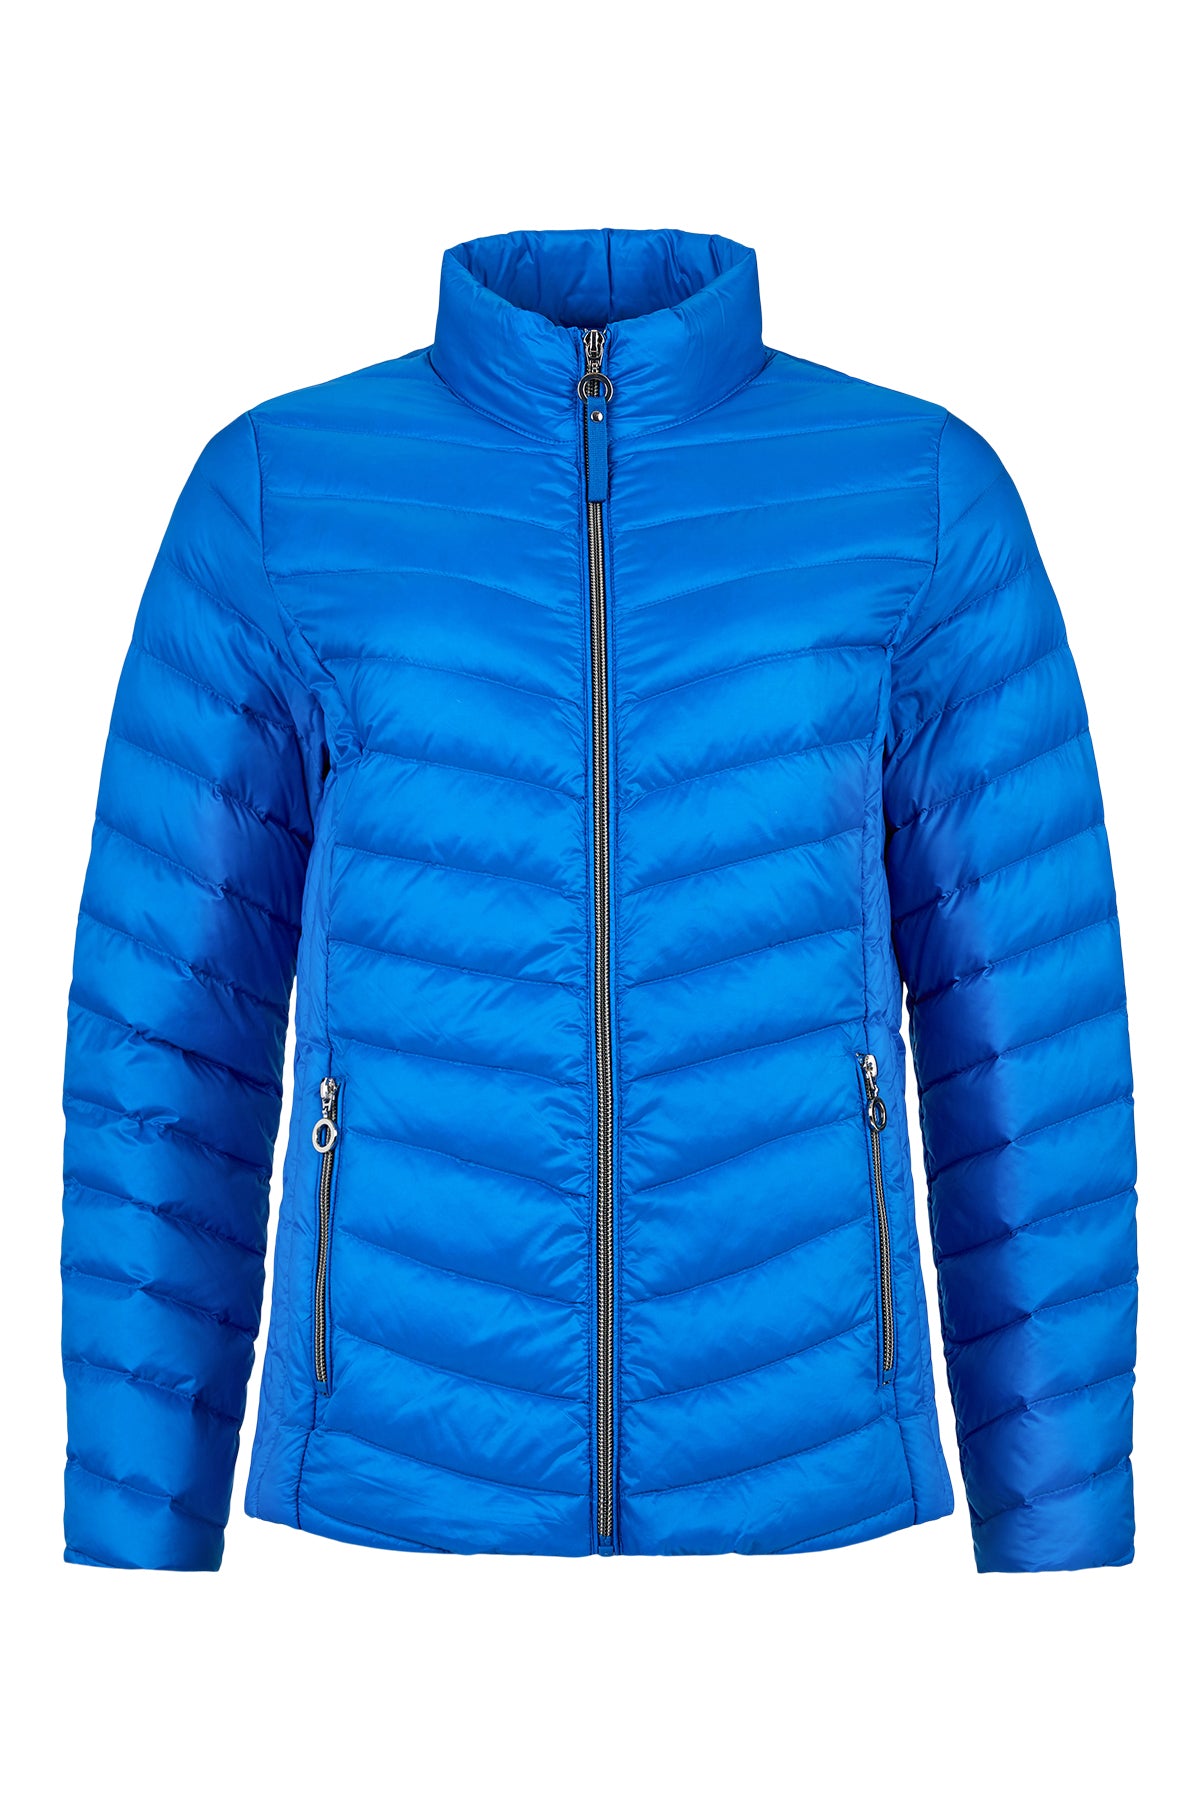 Royal Blue Zip up Puffer Jacket with Zip Pockets